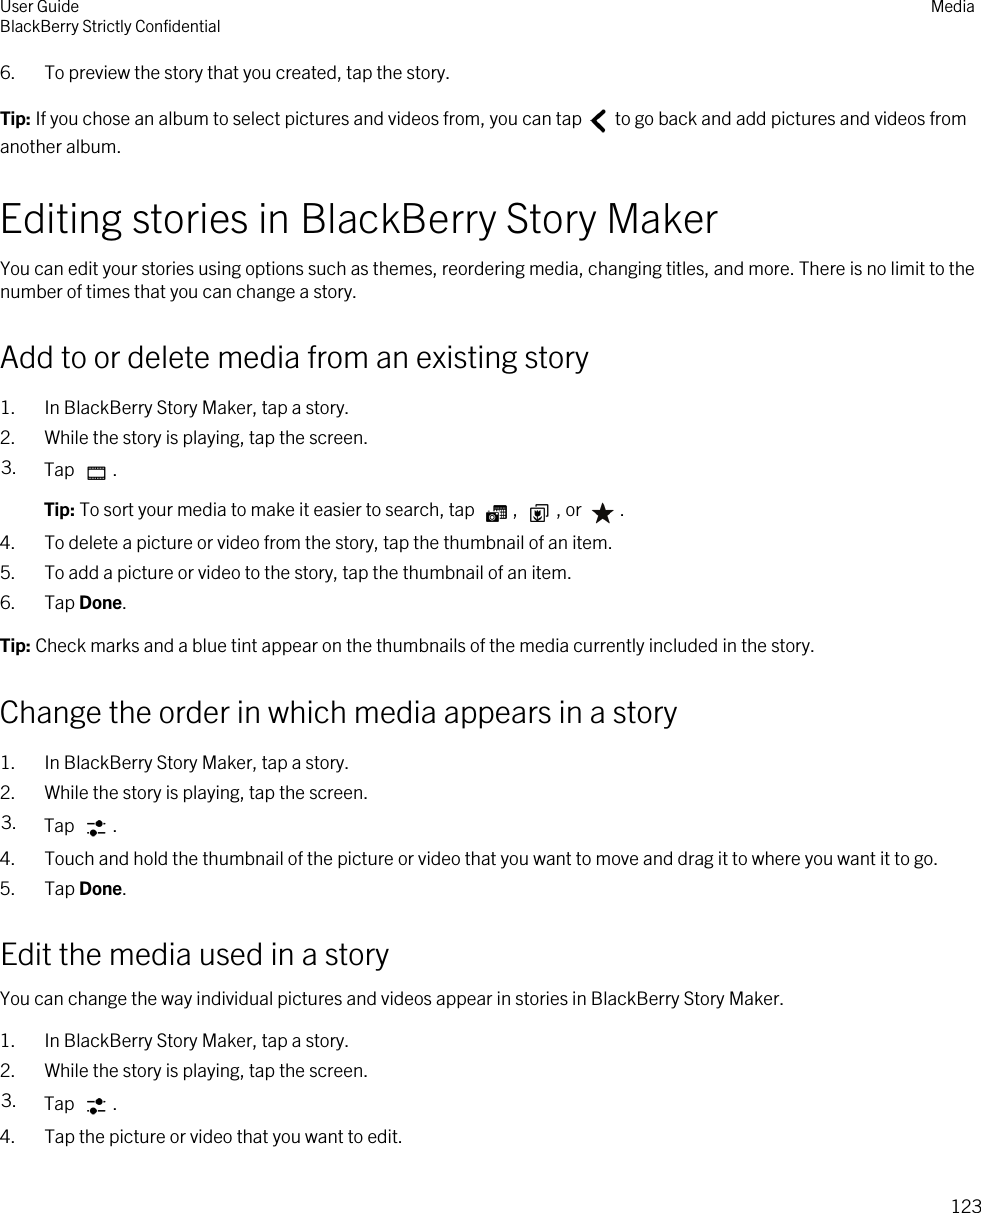 6. To preview the story that you created, tap the story.Tip: If you chose an album to select pictures and videos from, you can tap   to go back and add pictures and videos from another album.Editing stories in BlackBerry Story MakerYou can edit your stories using options such as themes, reordering media, changing titles, and more. There is no limit to the number of times that you can change a story.Add to or delete media from an existing story1. In BlackBerry Story Maker, tap a story.2. While the story is playing, tap the screen.3. Tap  .Tip: To sort your media to make it easier to search, tap  ,  , or  .4. To delete a picture or video from the story, tap the thumbnail of an item.5. To add a picture or video to the story, tap the thumbnail of an item.6. Tap Done.Tip: Check marks and a blue tint appear on the thumbnails of the media currently included in the story.Change the order in which media appears in a story1. In BlackBerry Story Maker, tap a story.2. While the story is playing, tap the screen.3. Tap  .4. Touch and hold the thumbnail of the picture or video that you want to move and drag it to where you want it to go.5. Tap Done.Edit the media used in a storyYou can change the way individual pictures and videos appear in stories in BlackBerry Story Maker.1. In BlackBerry Story Maker, tap a story.2. While the story is playing, tap the screen.3. Tap  .4. Tap the picture or video that you want to edit.User GuideBlackBerry Strictly Confidential Media123